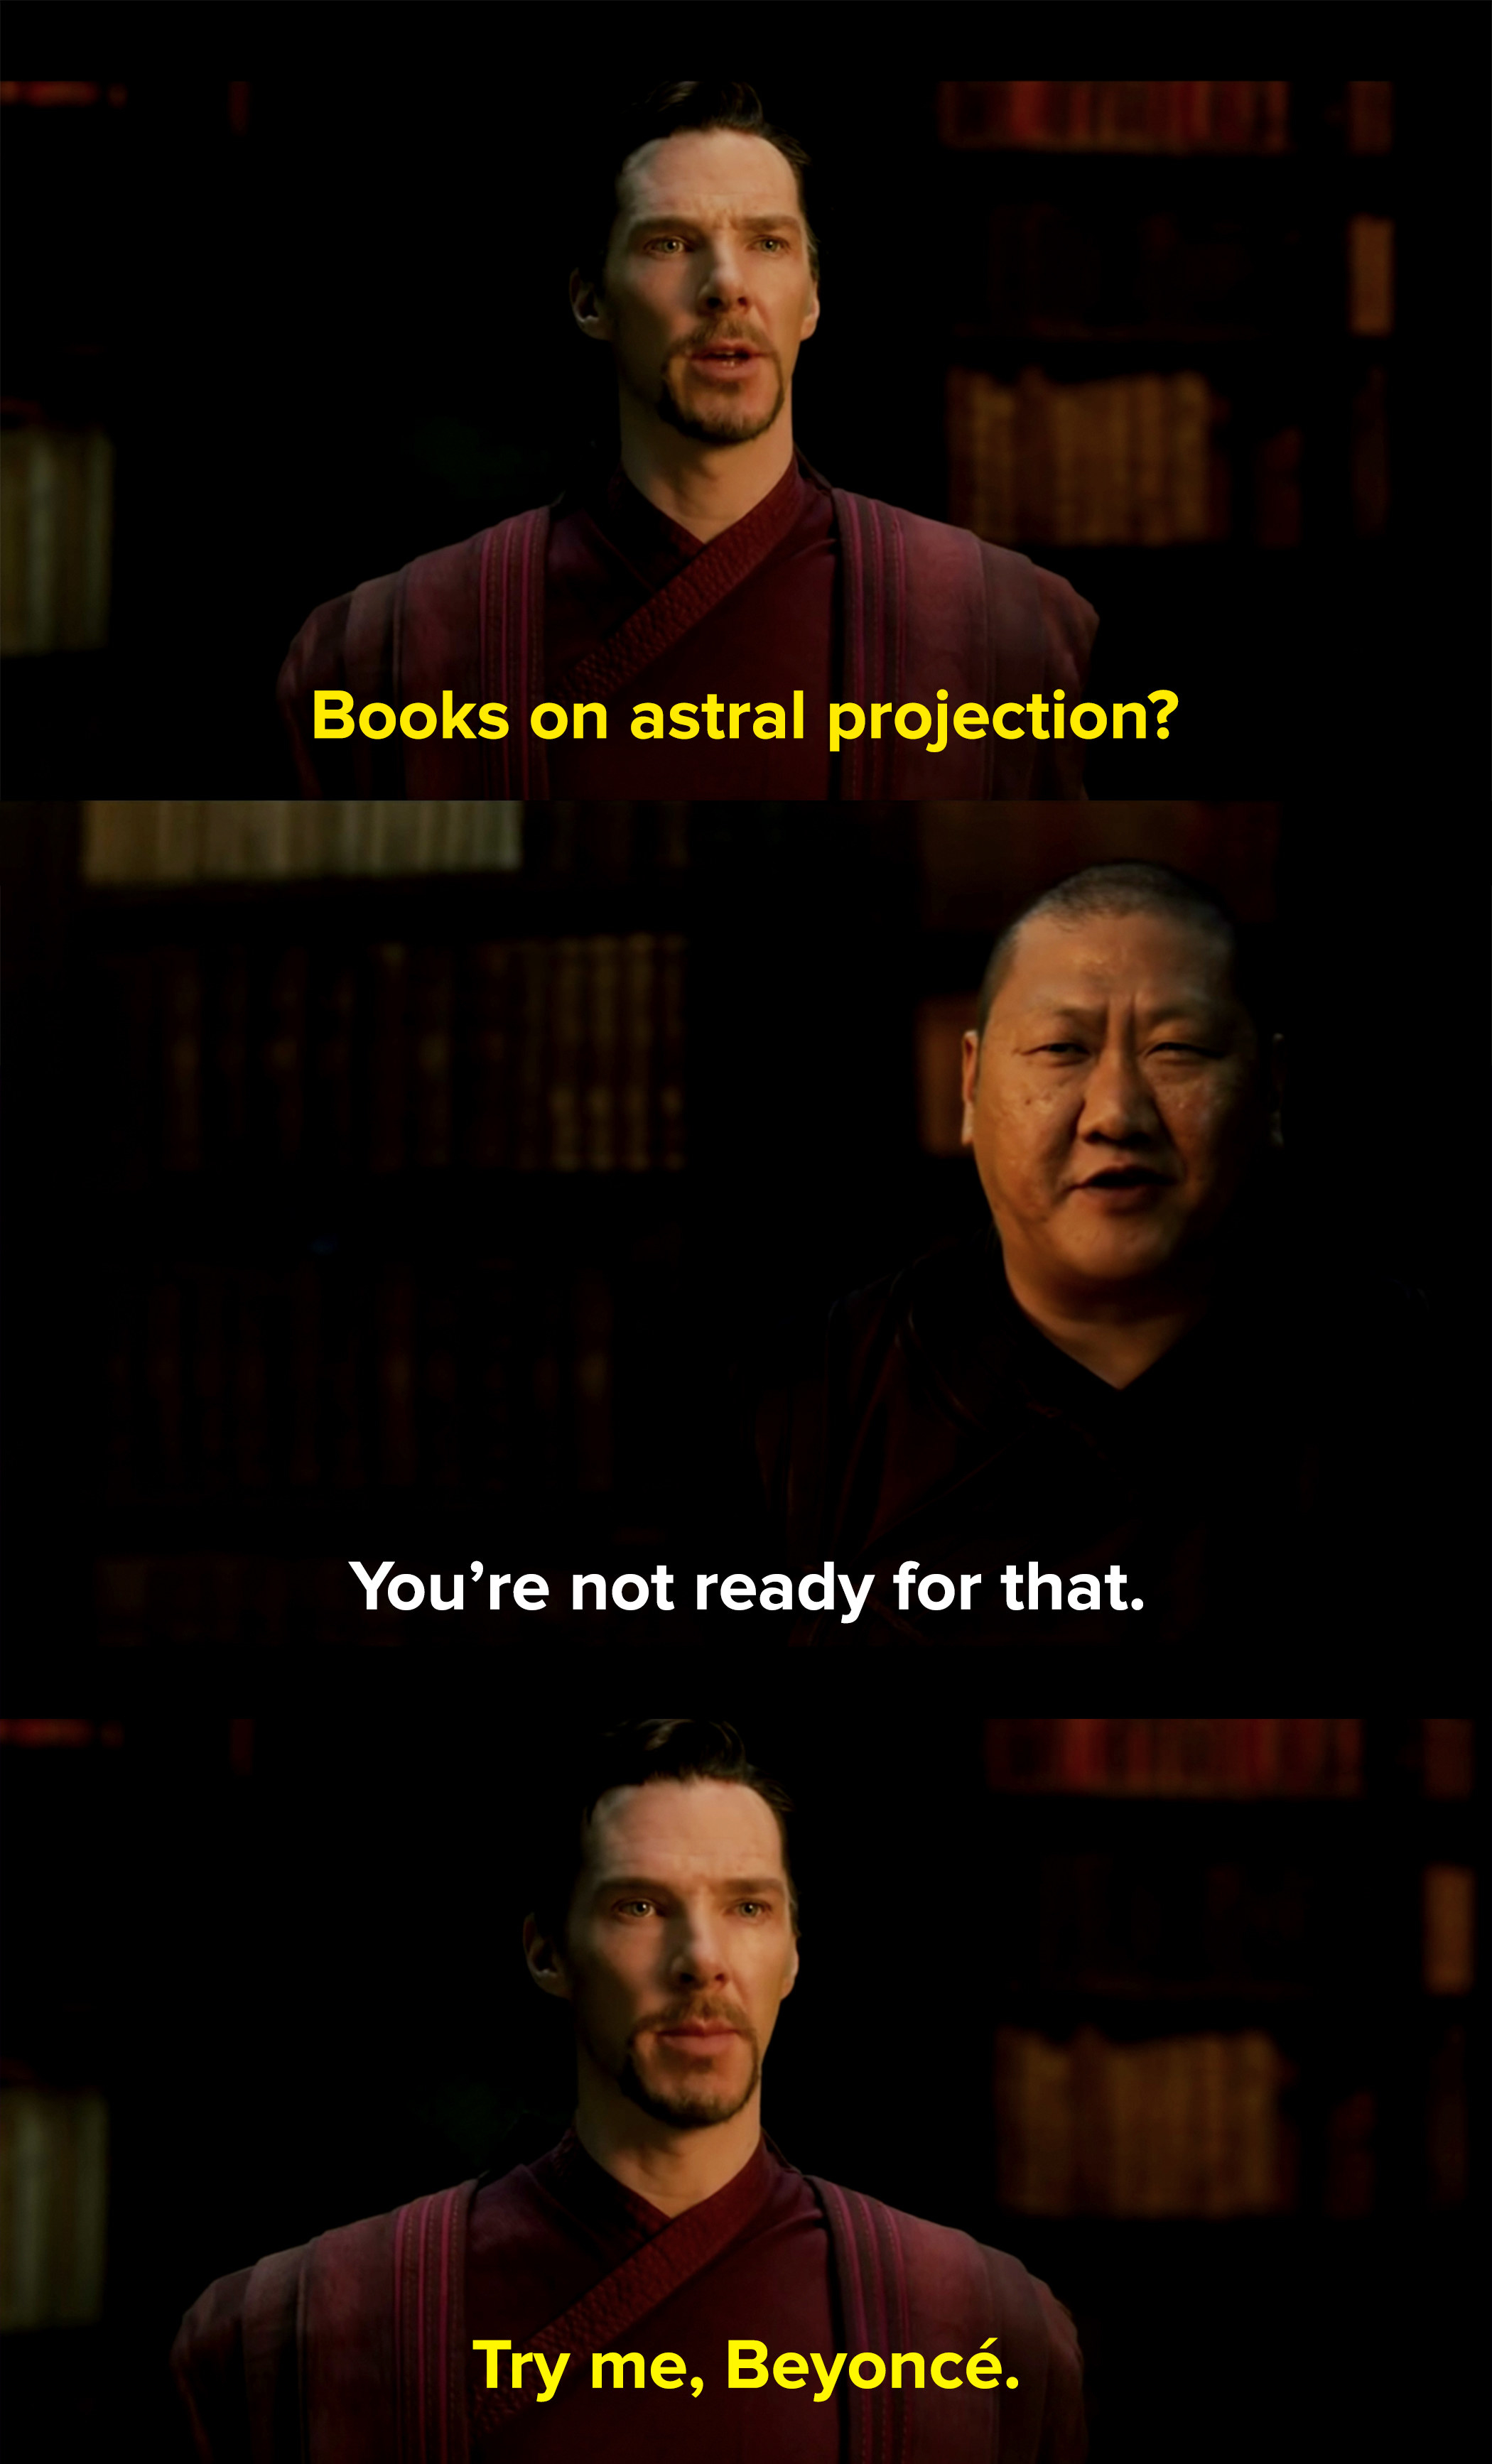 Wong tells Strange he&#x27;s not ready for books on astral projection, but Strange says try me, Beyoncé